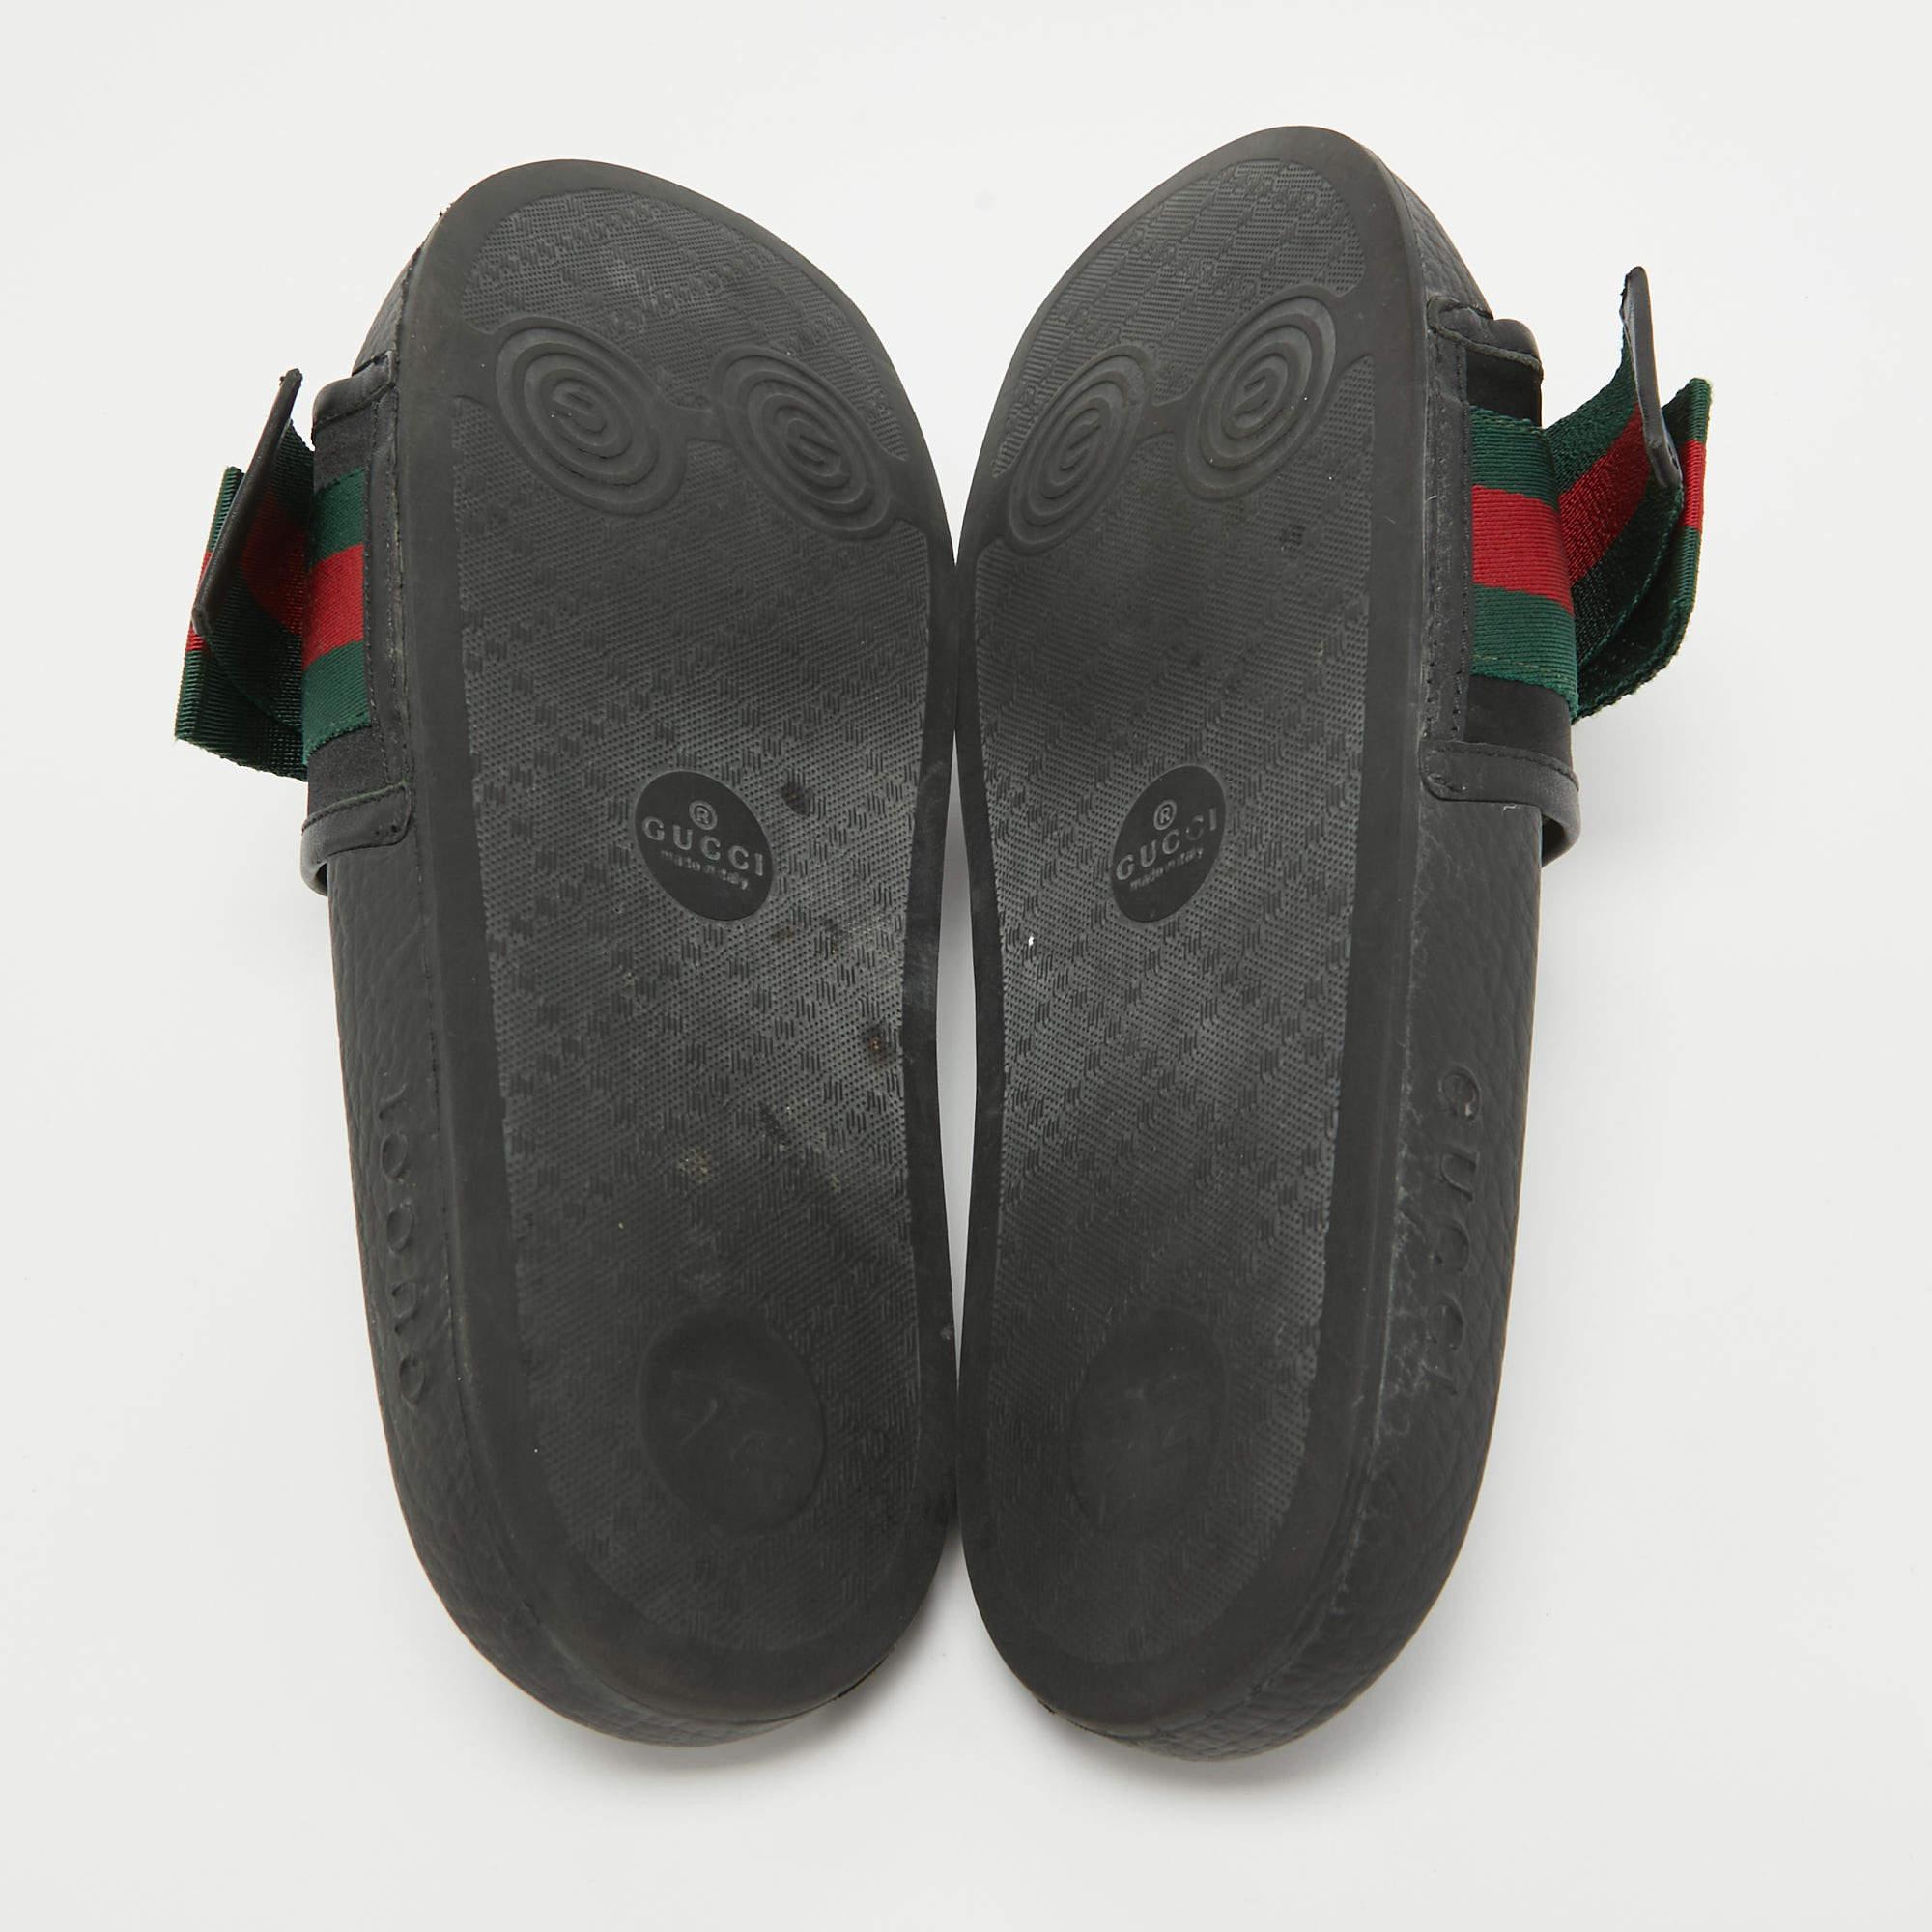 Gucci Tricolor Leather and Fabric Web Bow Pool Slides Size 37 For Sale 1